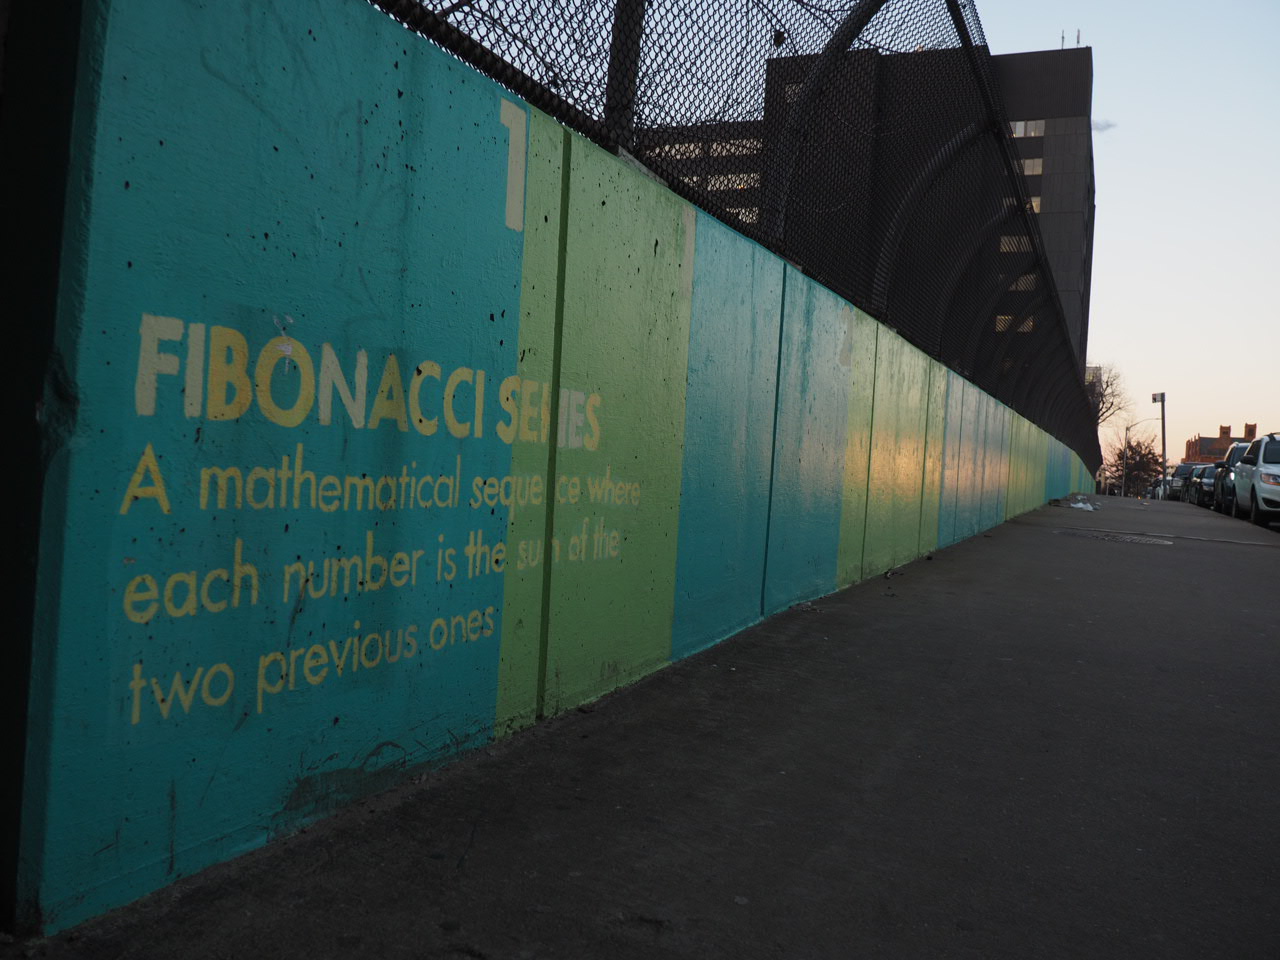 A mural depicting the Fibonacci series through a series of color blocks and the text "Fibonacci series: A mathematical sequence where each number is the sum of the two previous ones" on a wall along a sidewalk at sunset